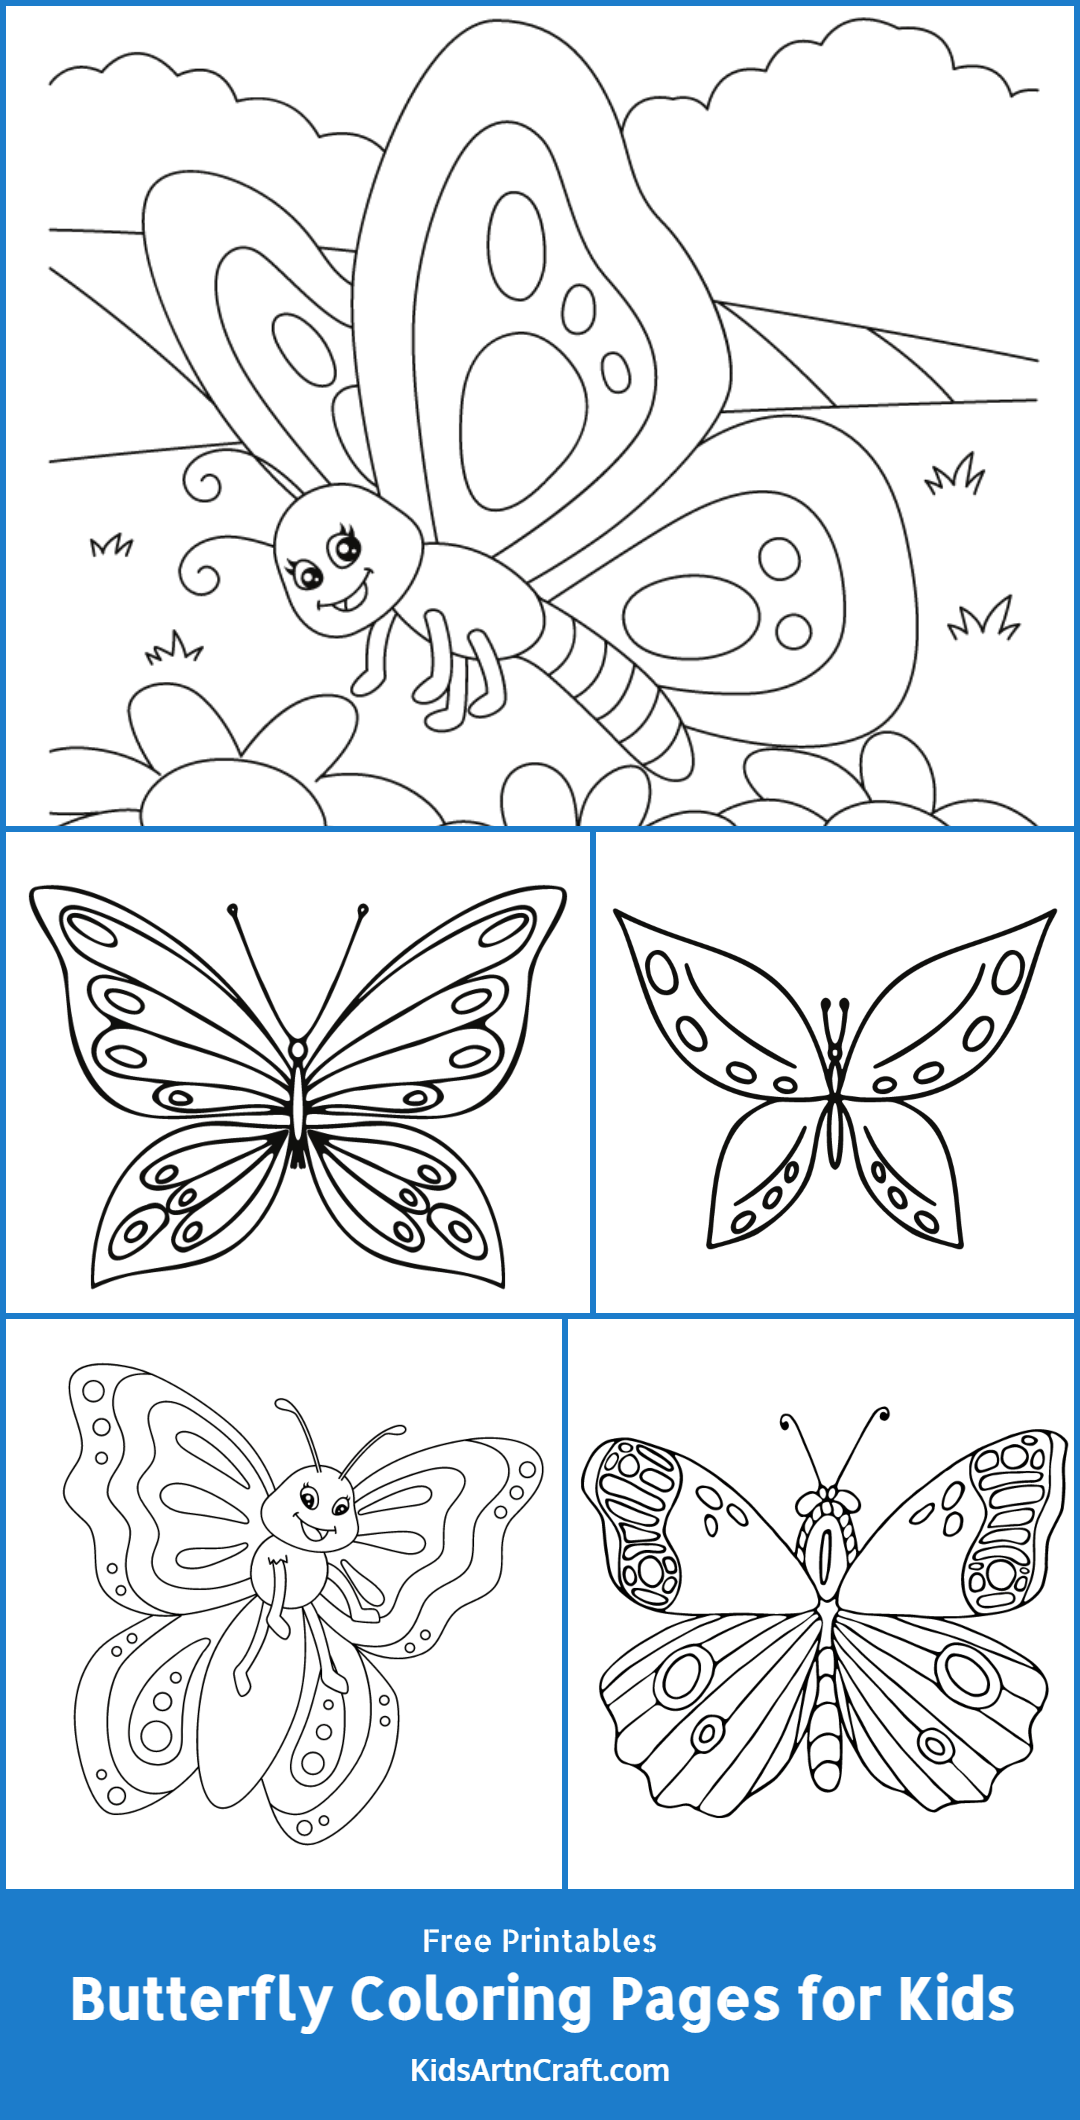 Butterfly Coloring Pages for Kids – Free Printables   Kids Art & Craft